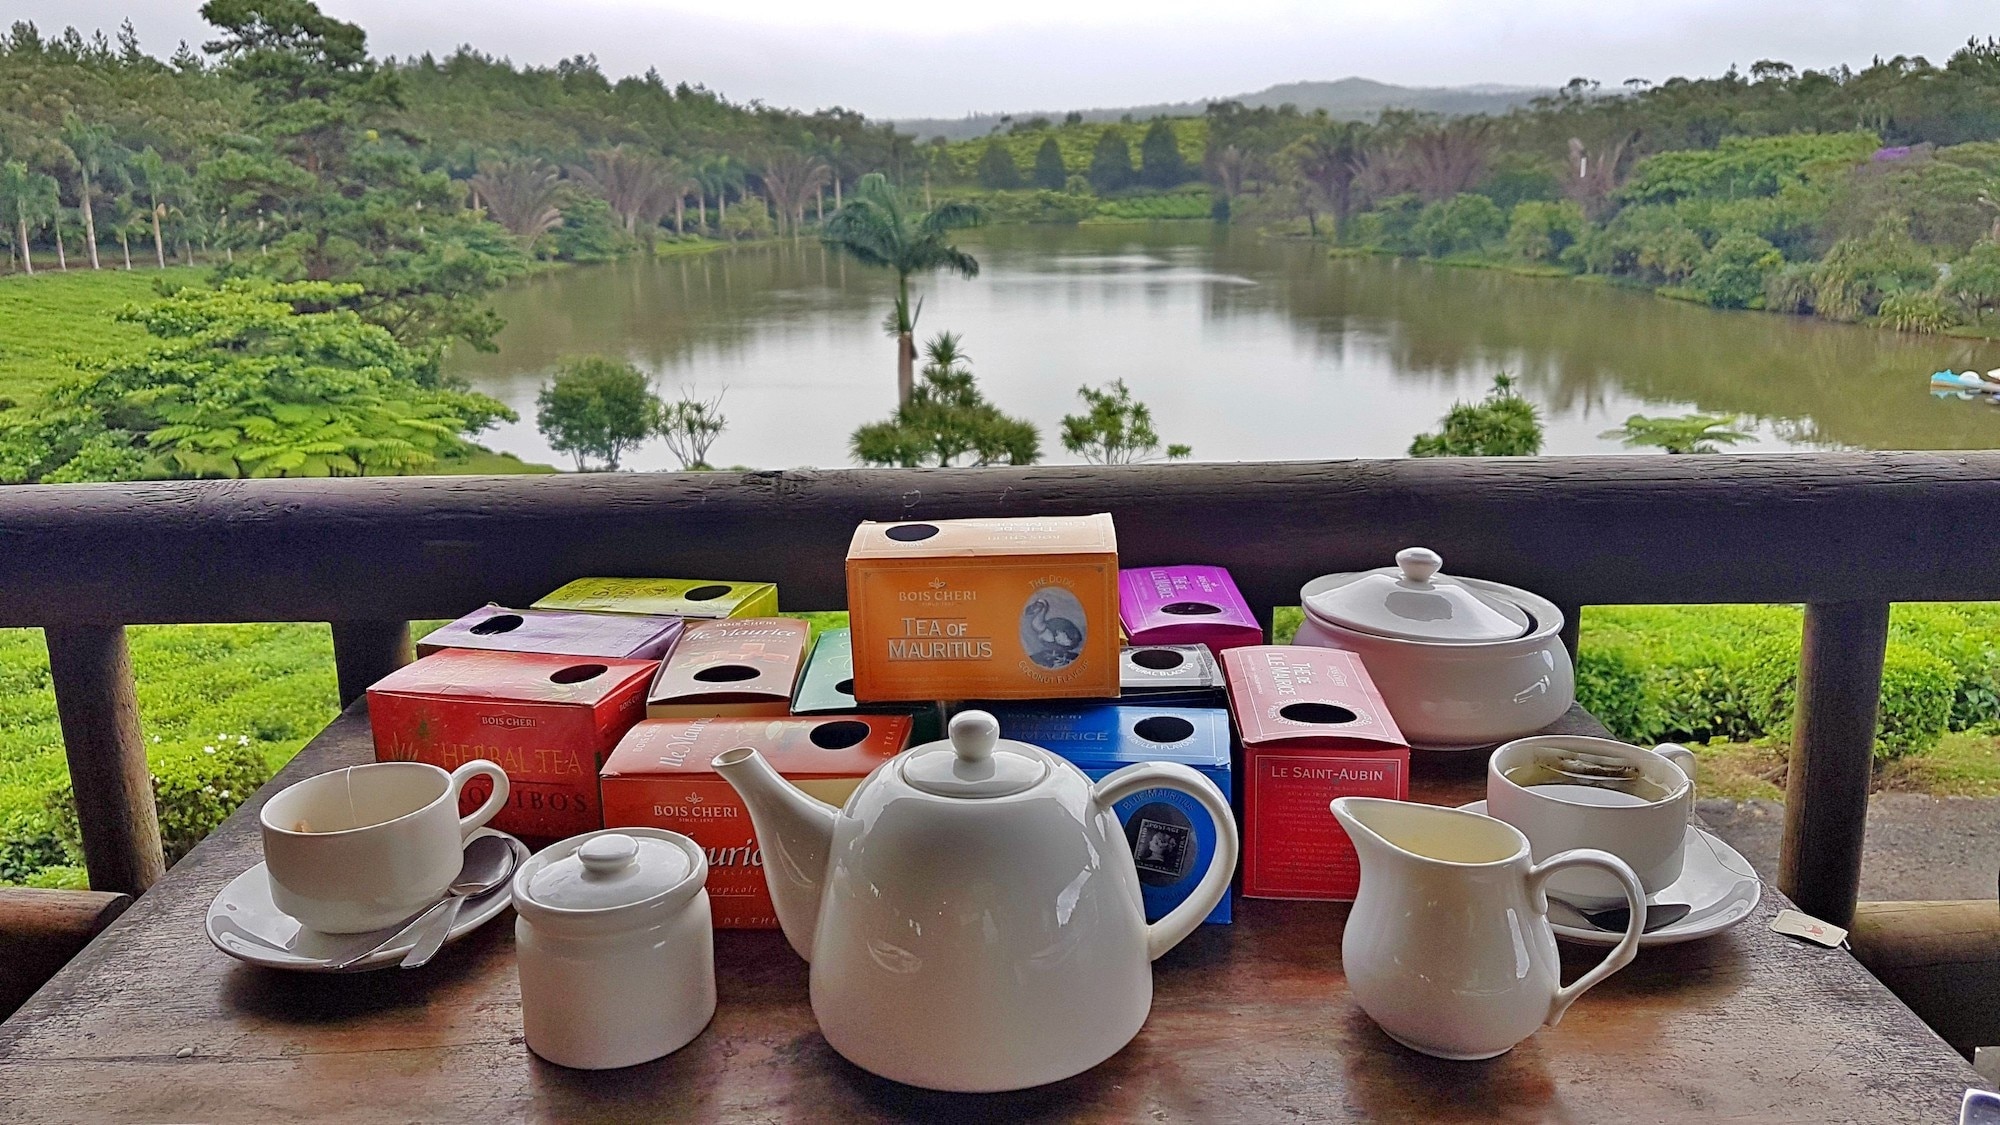 We found this place by random while we were driving in the rain, hungry and a little lost. The restaurant was closed but for 100 rupees, you can try all the tea you want with one of the most impressive tropical views we've seen on the island!

#mauritius #tea #teatime #afternoontea